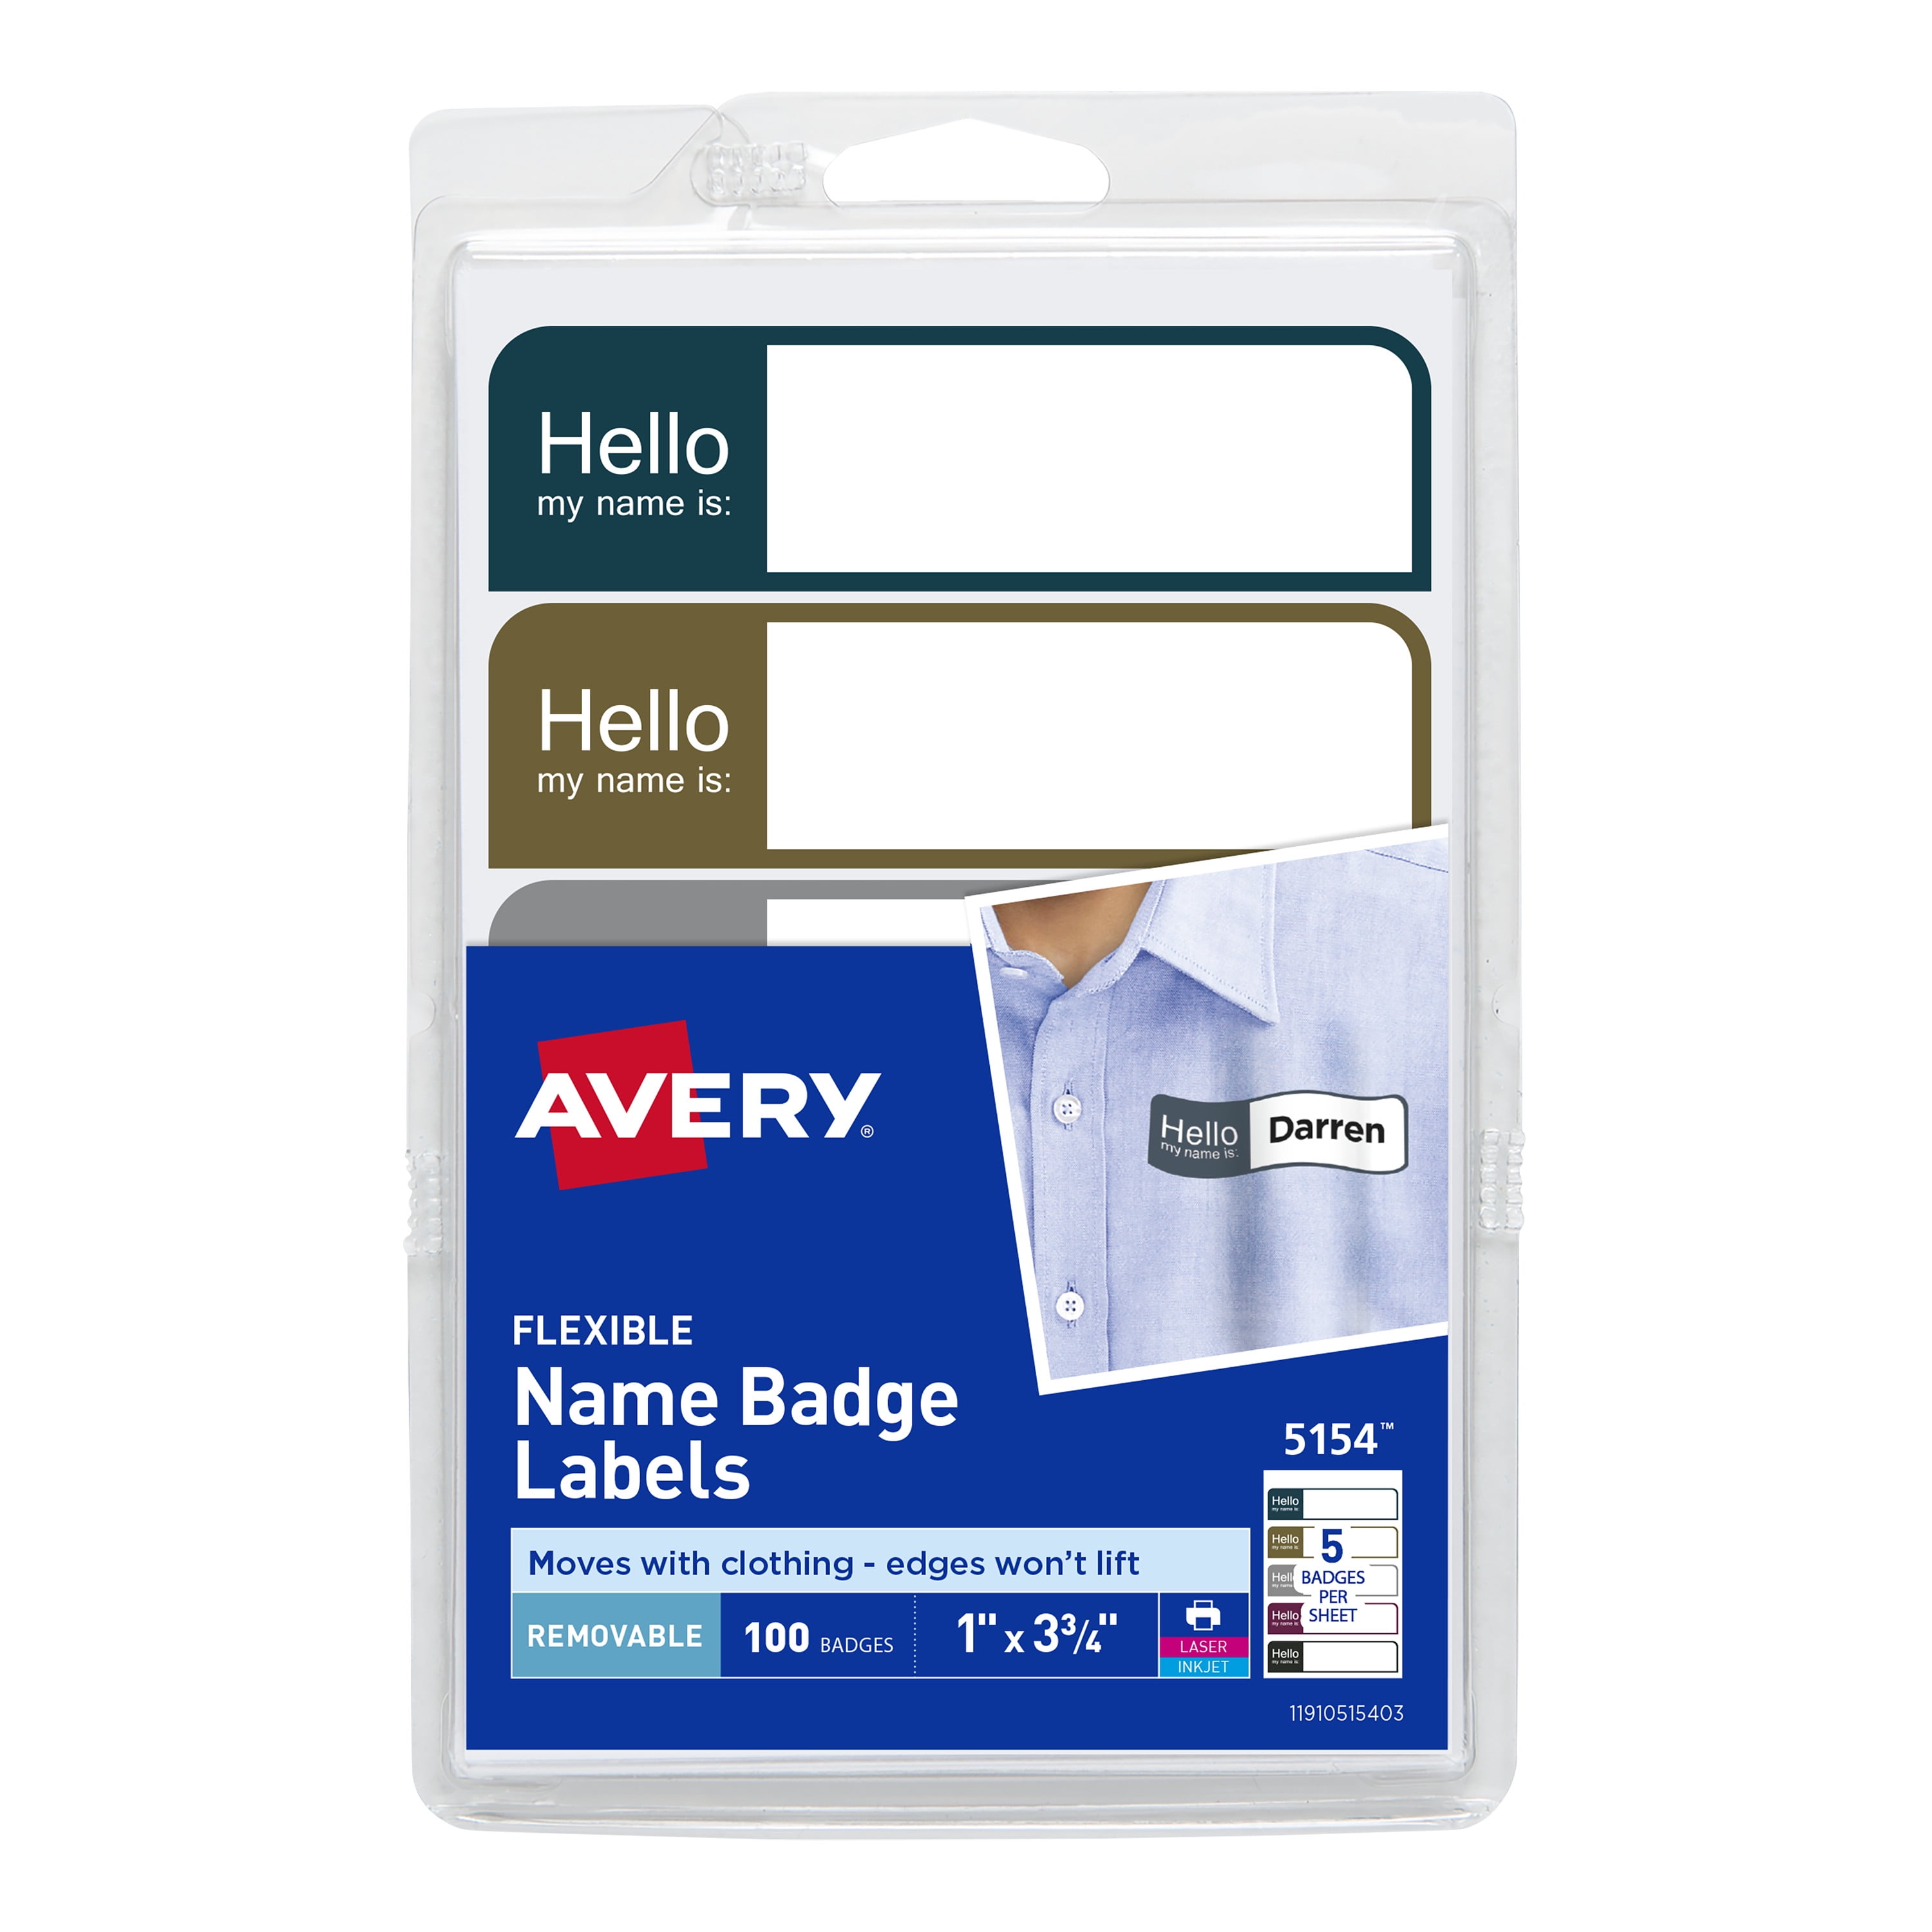 AVERY NAME BADGE LABELS 6155 LOT OF 3 